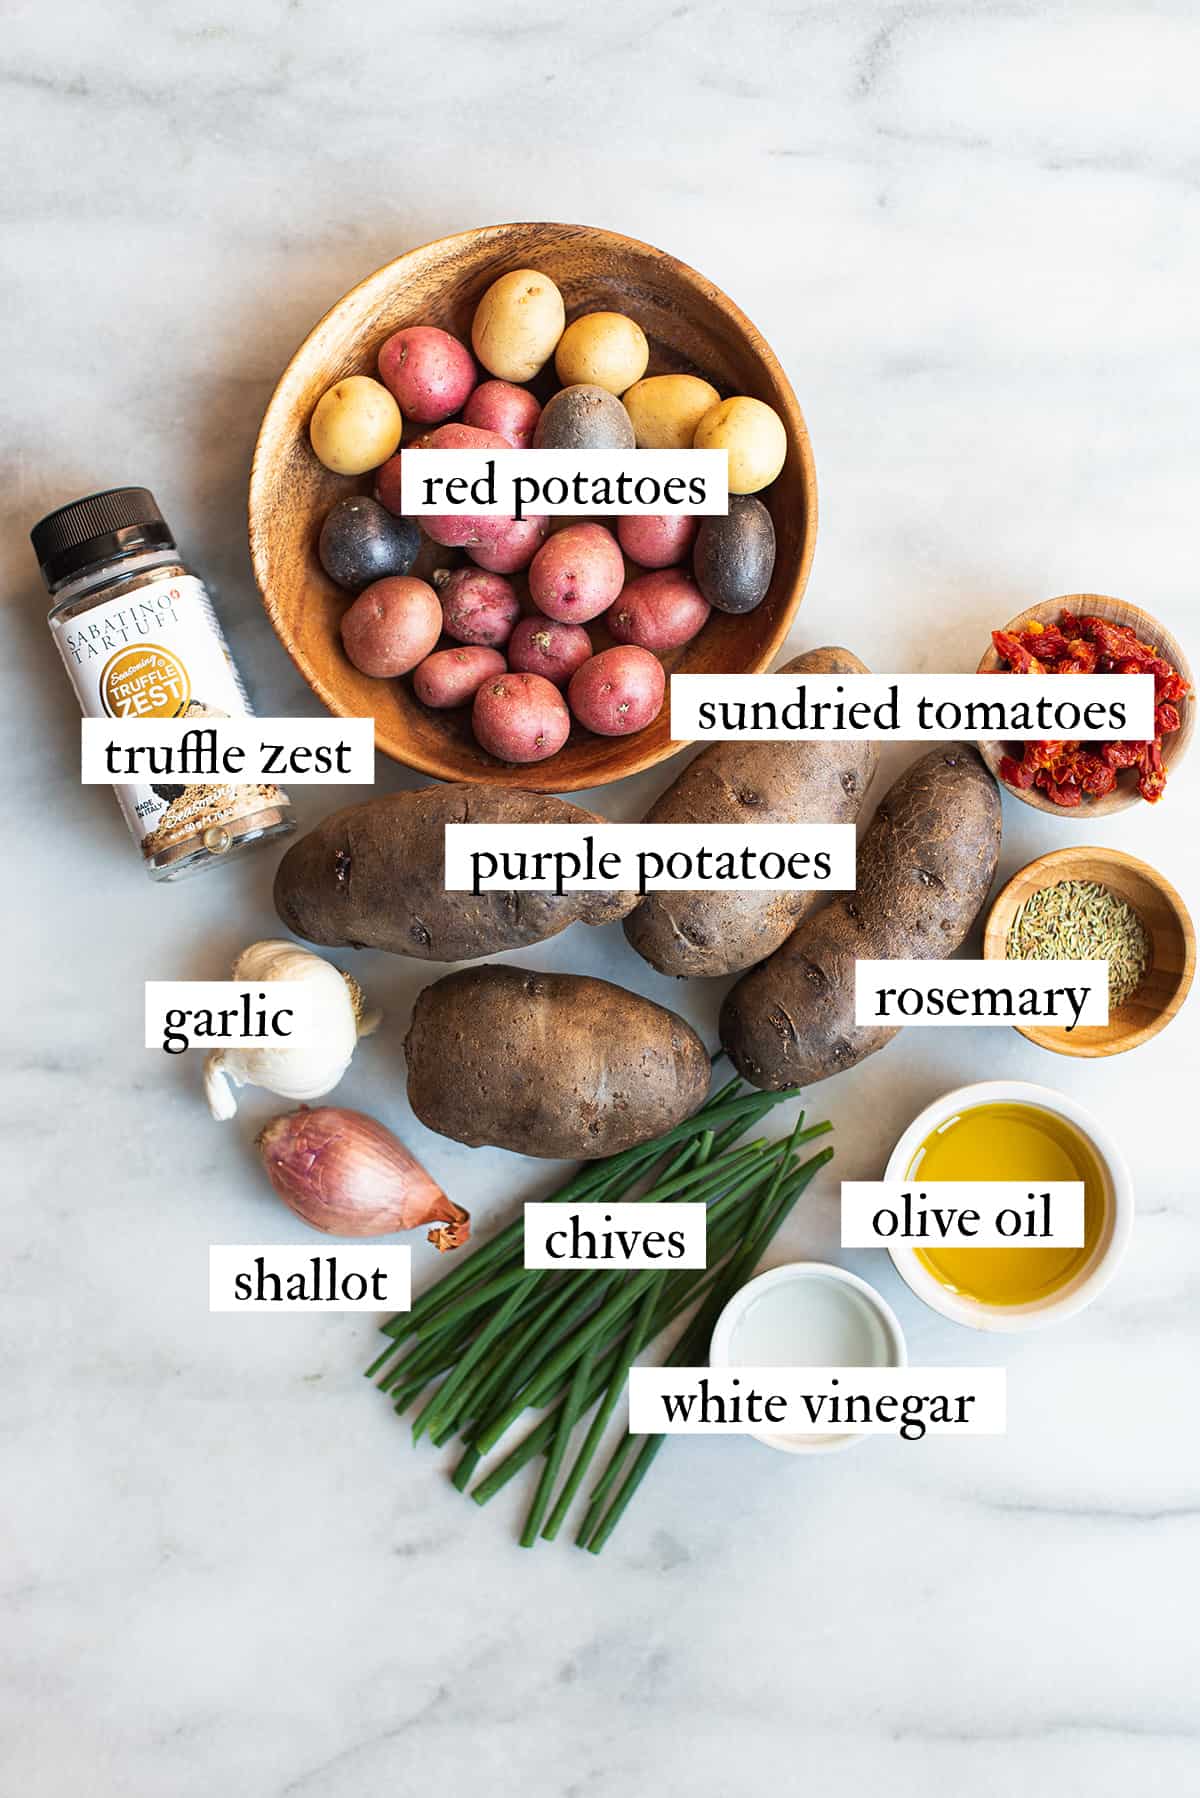 ingredients for red potato salad on marble countertop